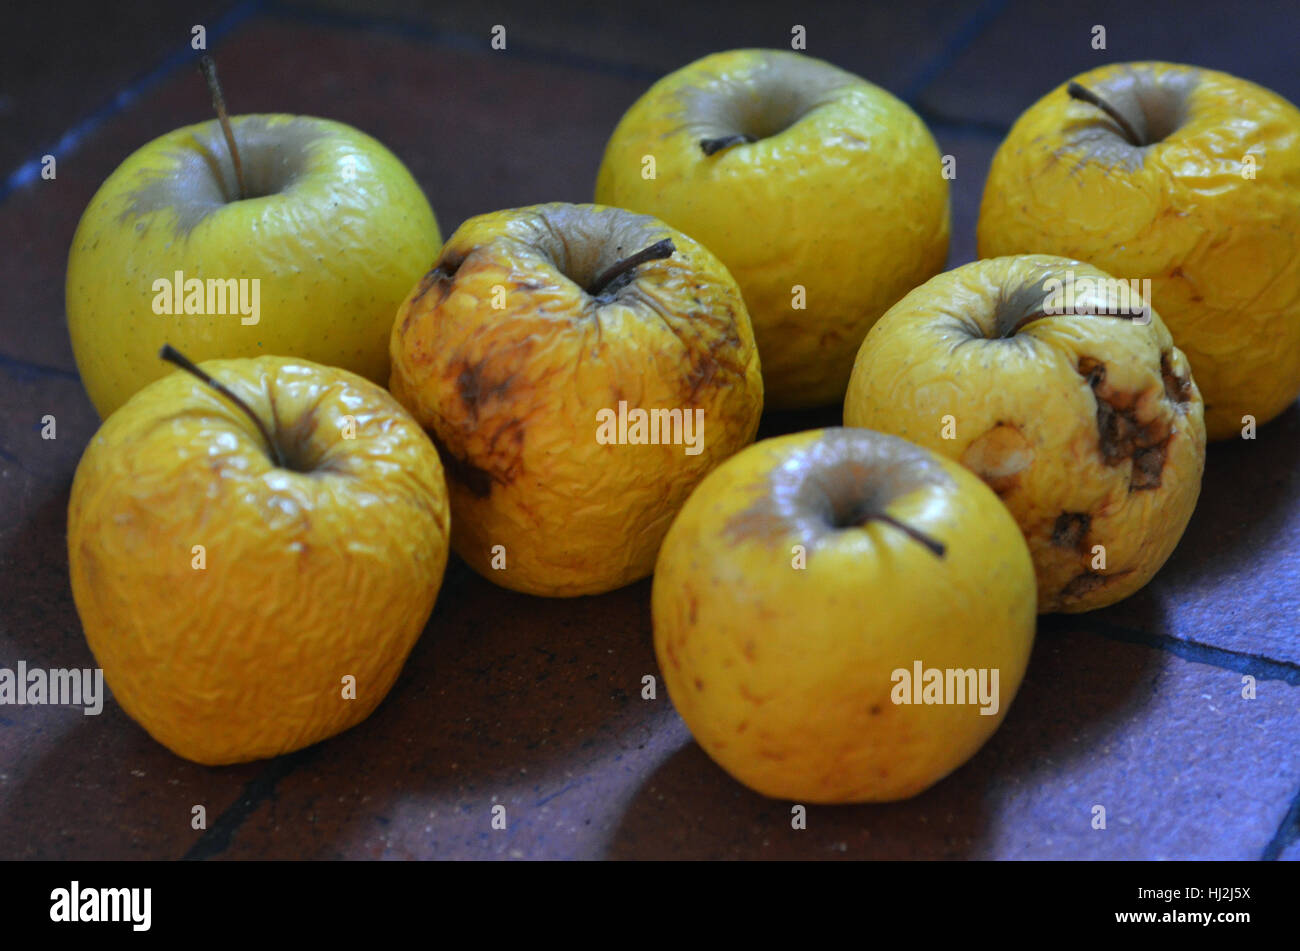 Old rotten apples Stock Photo